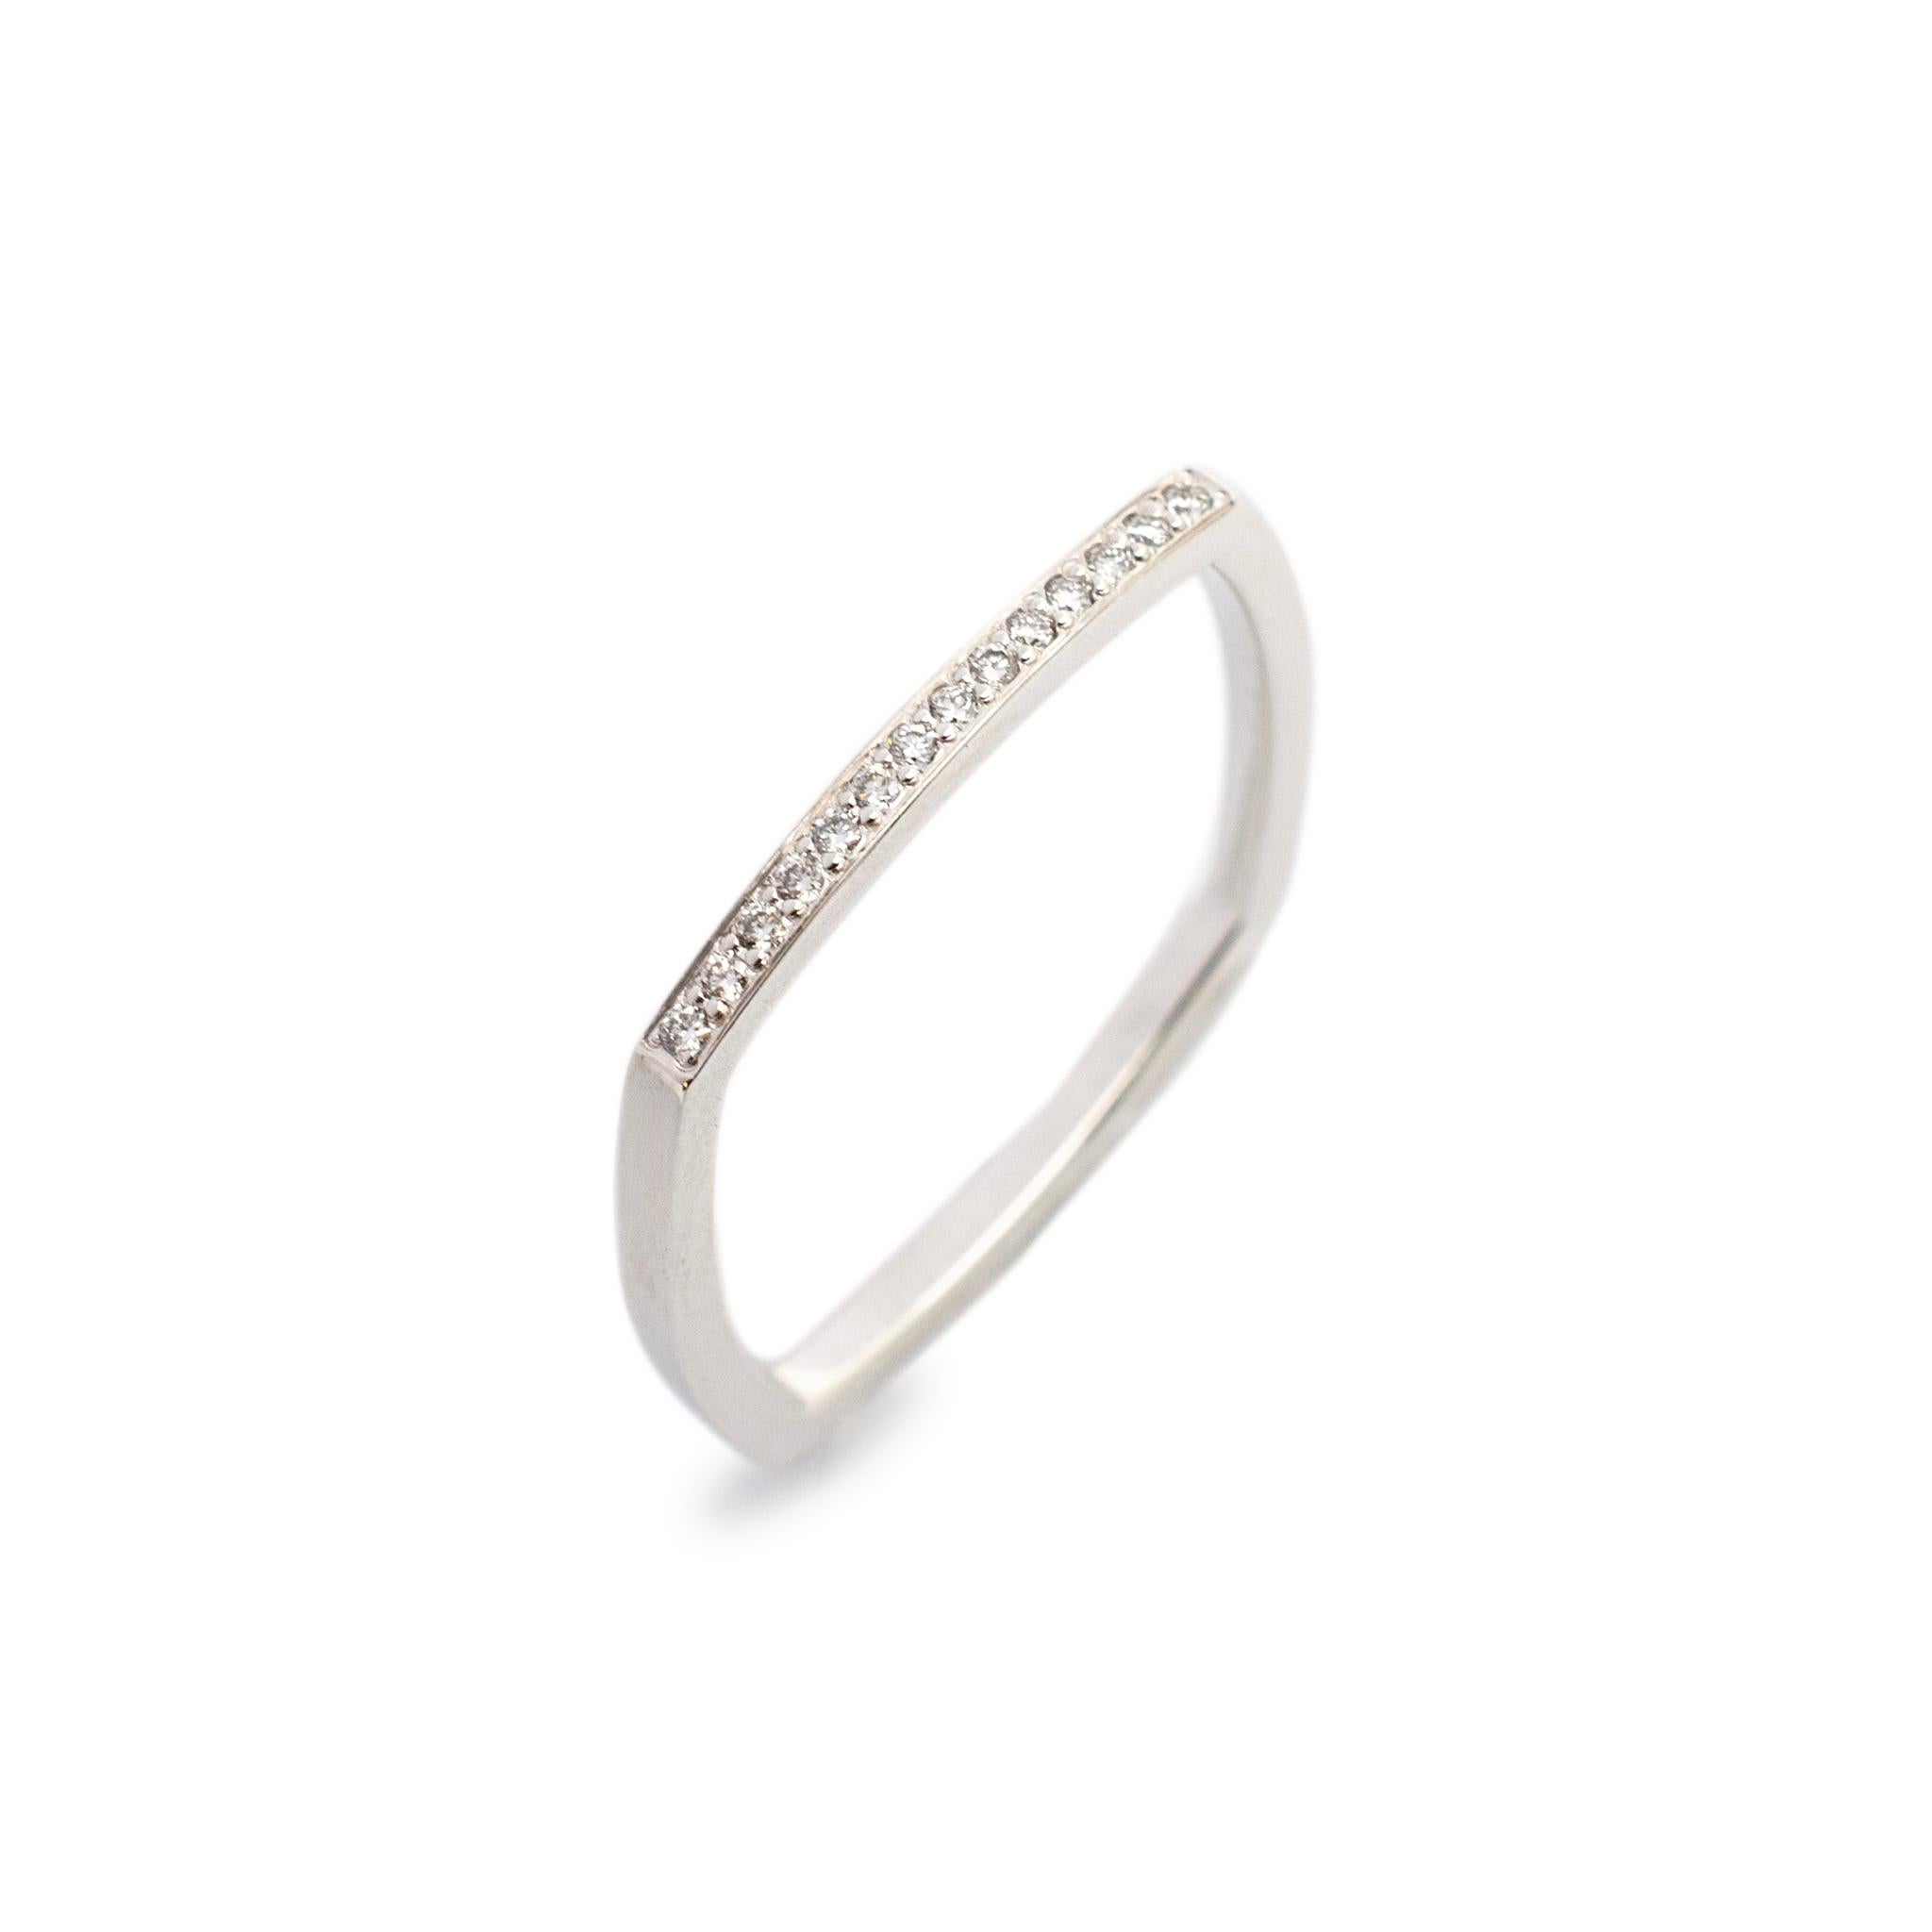 Brand: Tiffany & Co.

Gender: Ladies

Metal Type: 18K White Gold

Size: 6

Shank Width: 1.60 mm

Weight: 1.90 grams

Ladeis 18K white gold diamond wedding band with a soft-square shank. Engraved with 